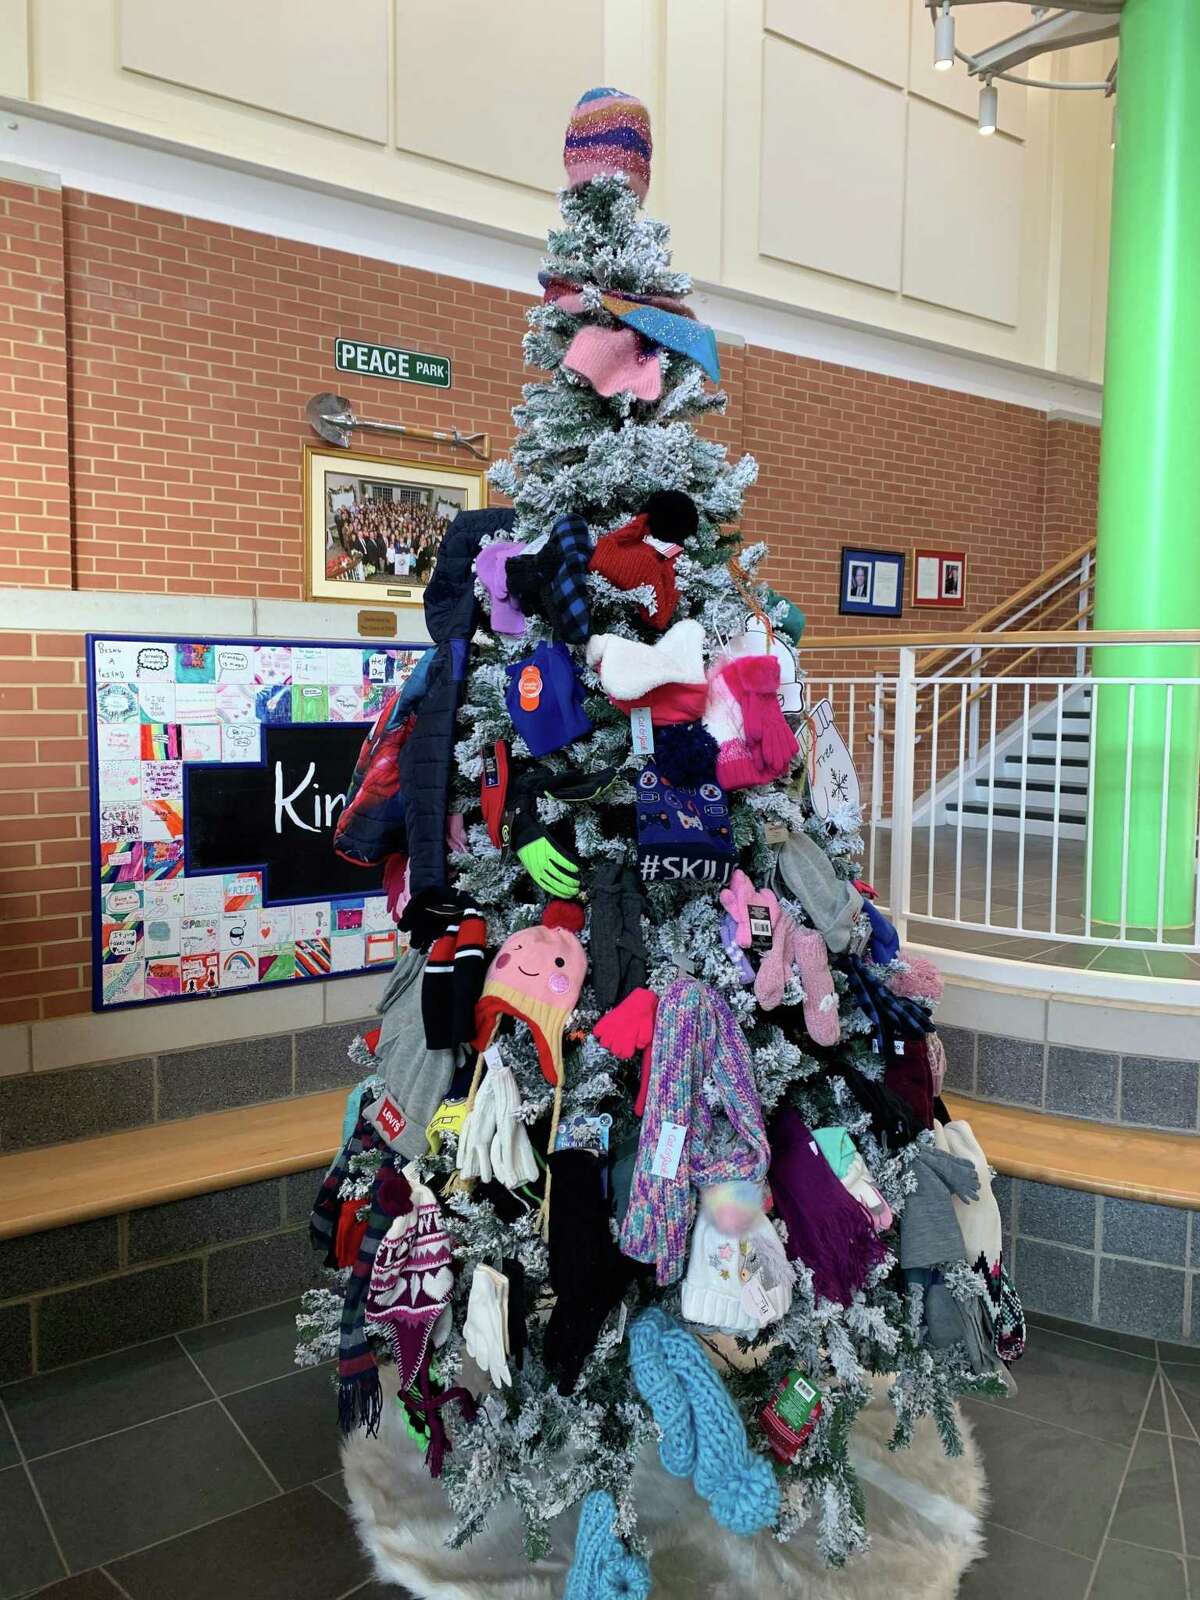 Frenchtown Elementary School's PTA called upon families during the month of December to help families in need by donating new mittens, gloves, hats and/or scarves to keep hands and heads warm this winter. All donations were hung on the Winter Giving Tree at Frenchtown, where two large trees were decorated. The PTA distributed the items on Friday, Dec. 20, to those families.